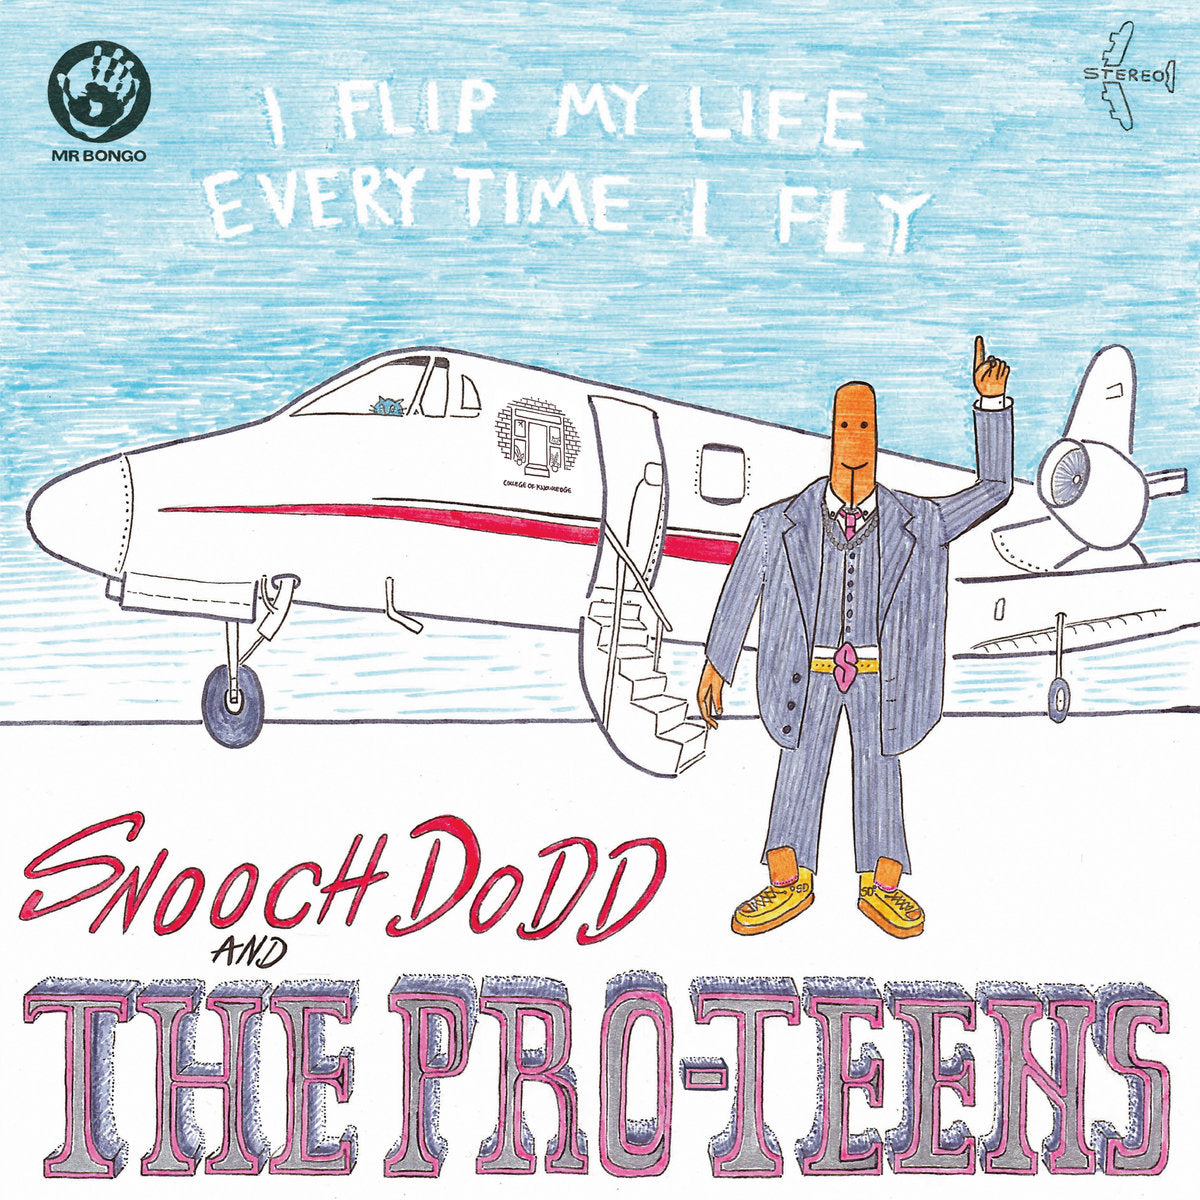 Snooch Dodd and The Pro Teens - I Flip My Life Every Time I Fly